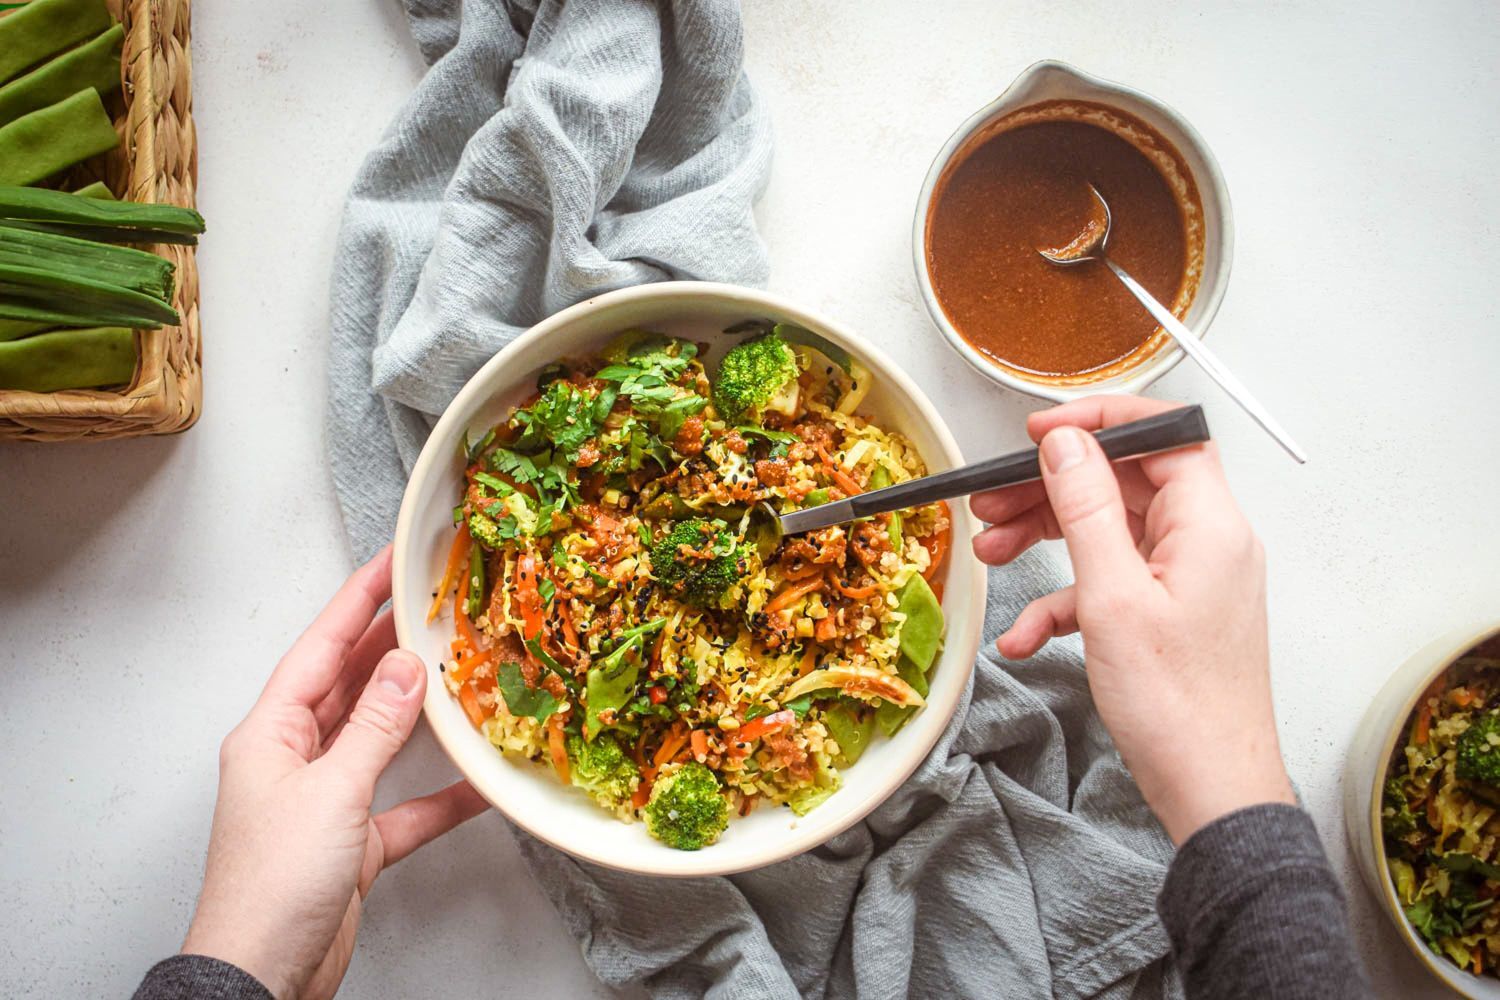 Asian quinoa stir fry with broccoli, carrots, cabbage, and snow peas in a bowl with stir fry sauce and sesame seeds.